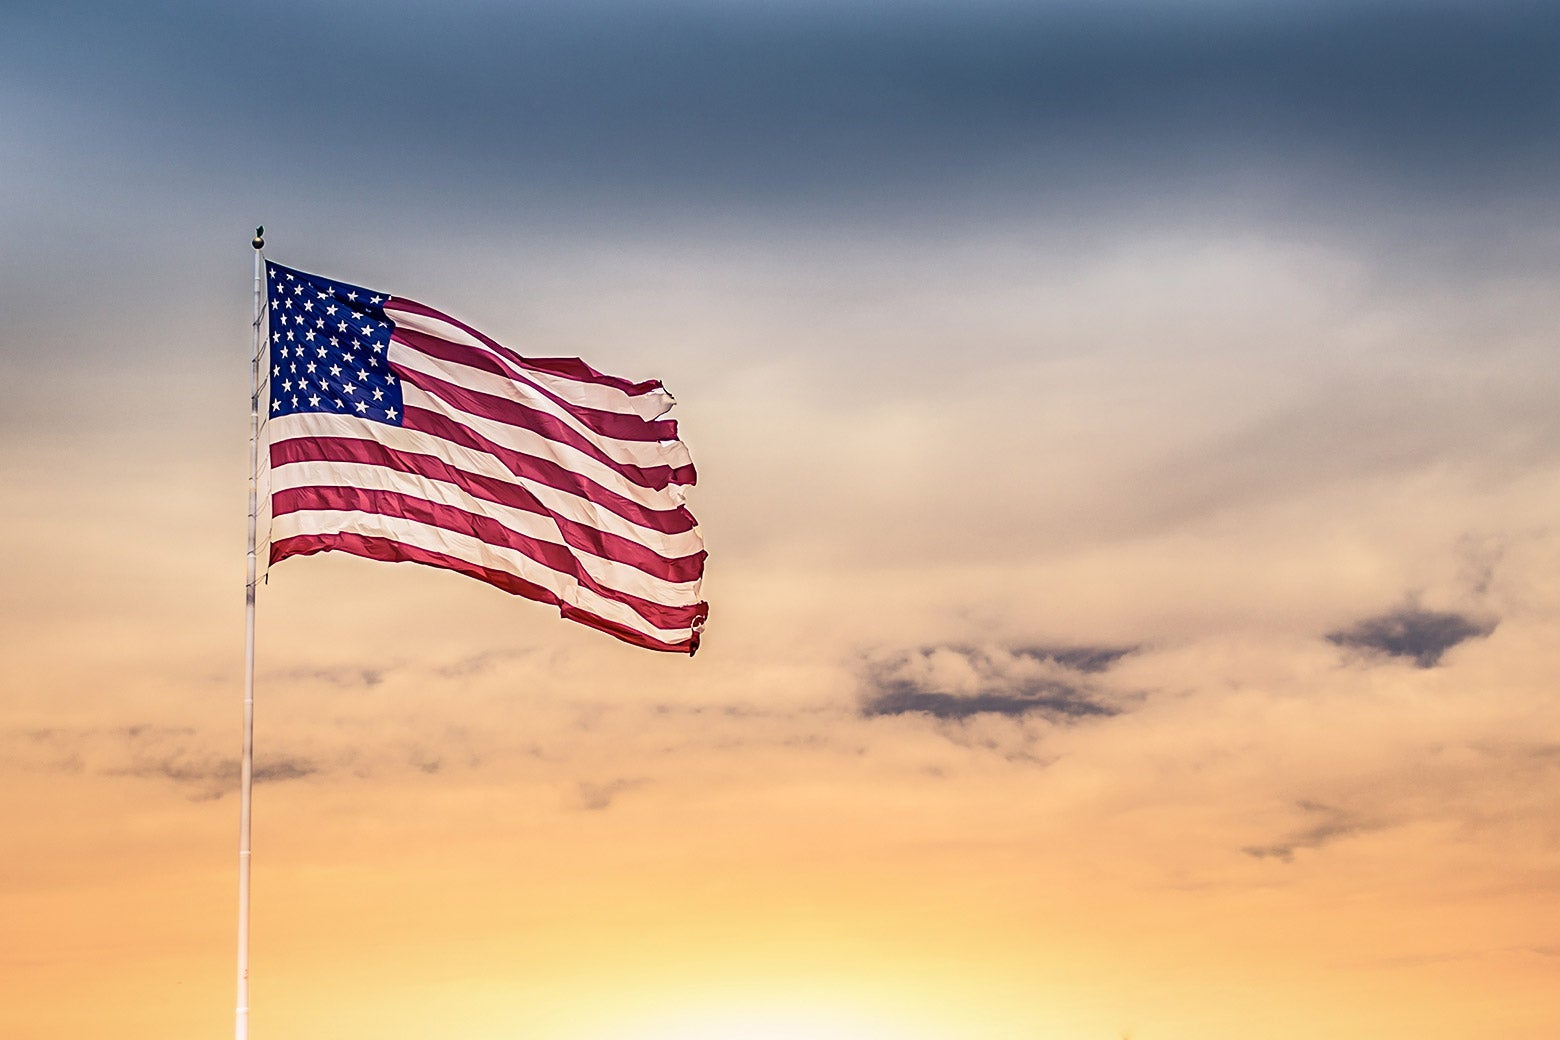 A U.S. flag is seen waving against a sunset.